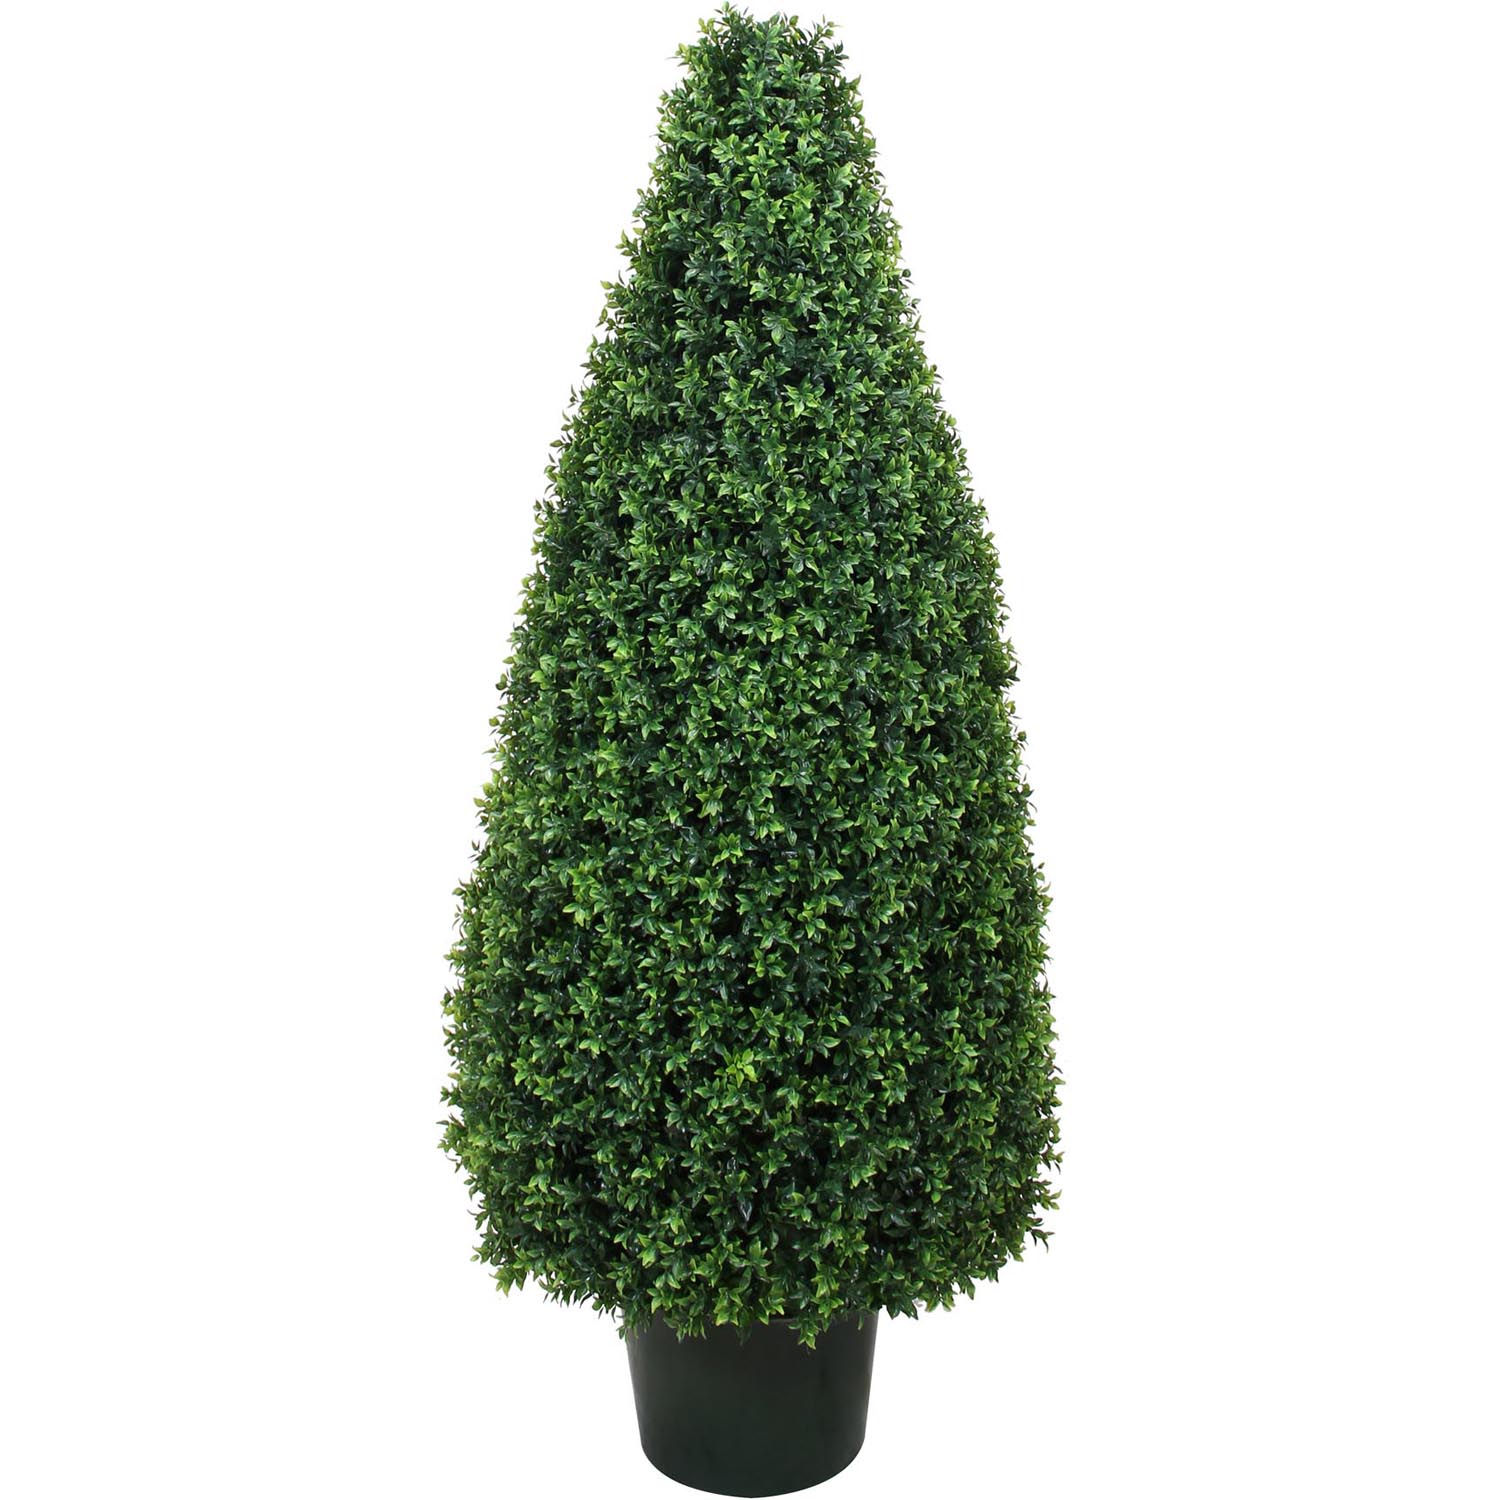 42 Inch Uv Protected Basil Cone Topiary: Potted